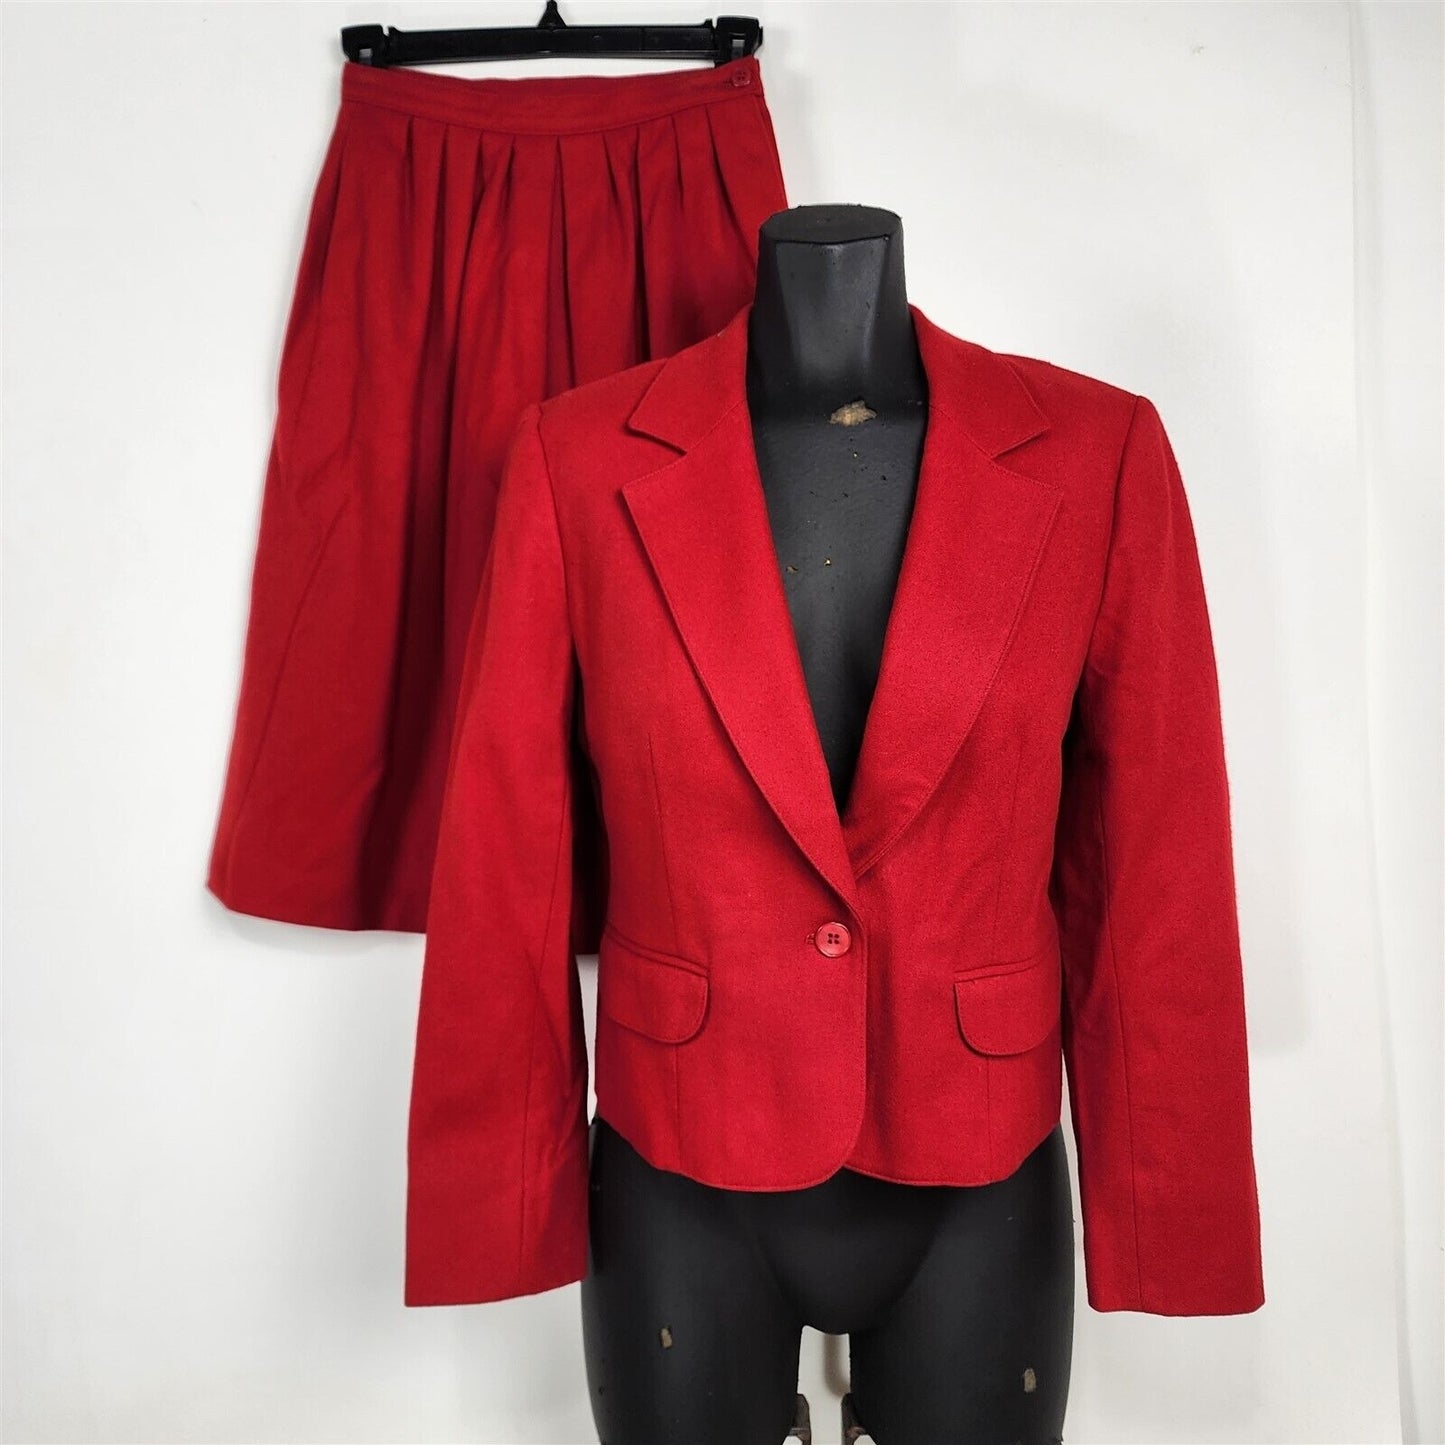 Vintage Solid Red Wool Skirt Suit Set Womens Size 4 Petite